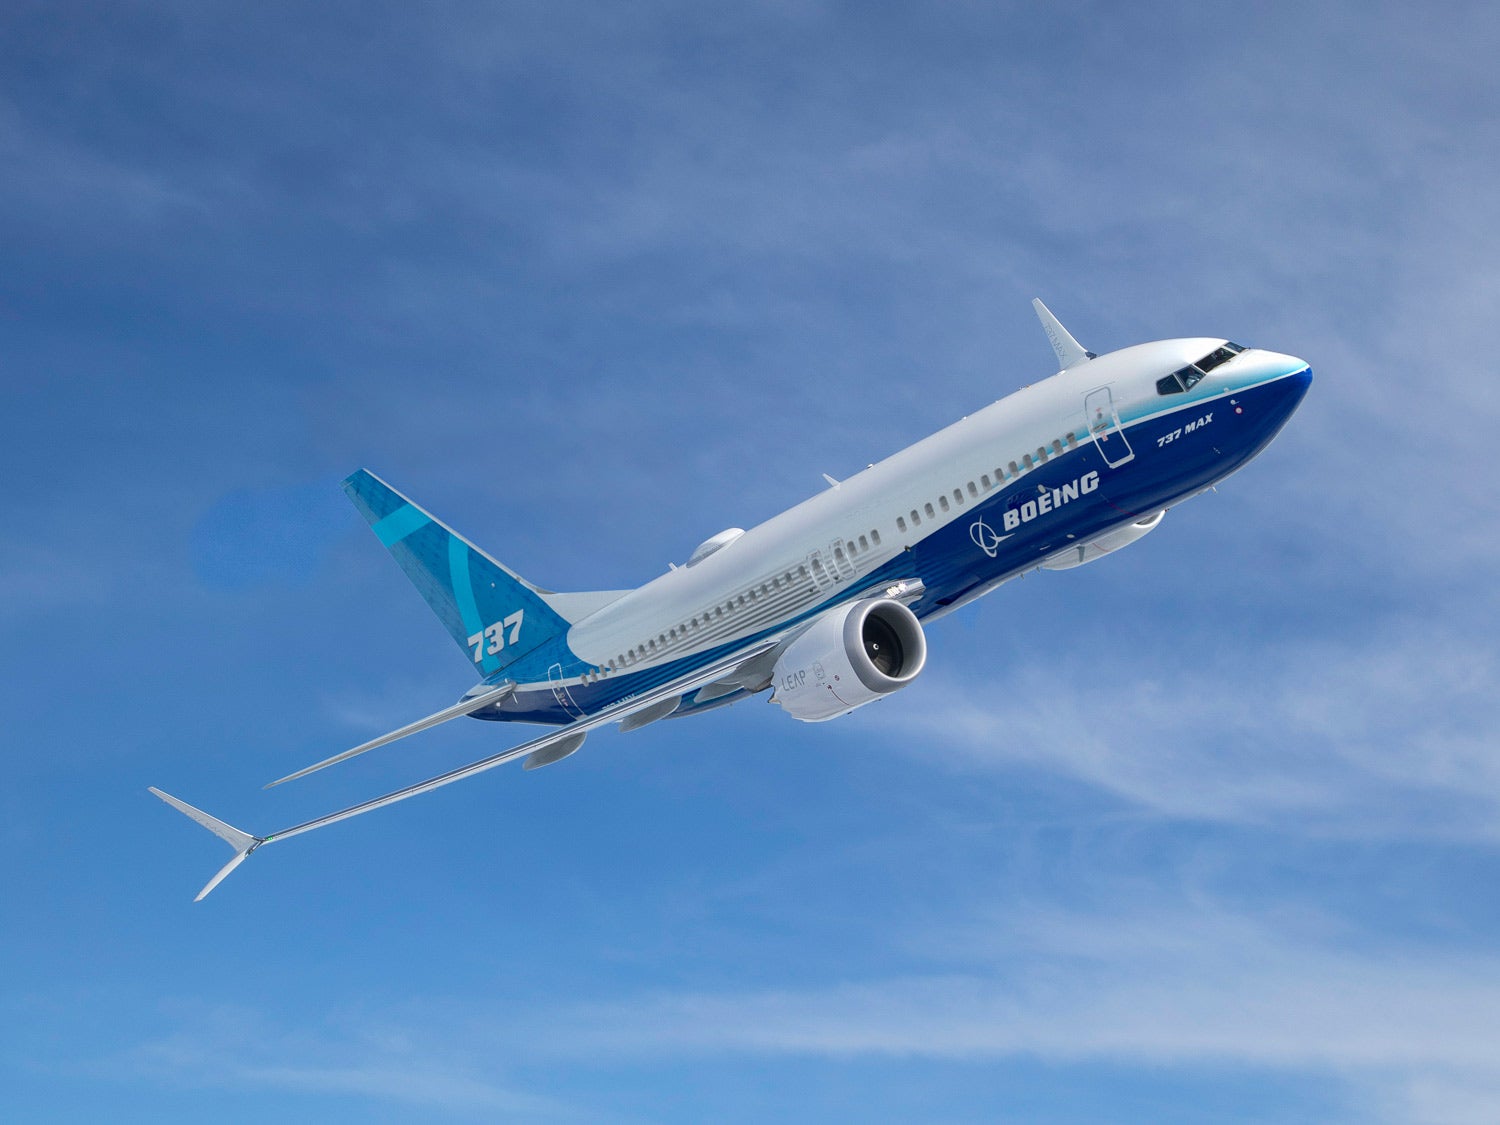 Grand Jury Looking Into Boeing’s 737 MAX